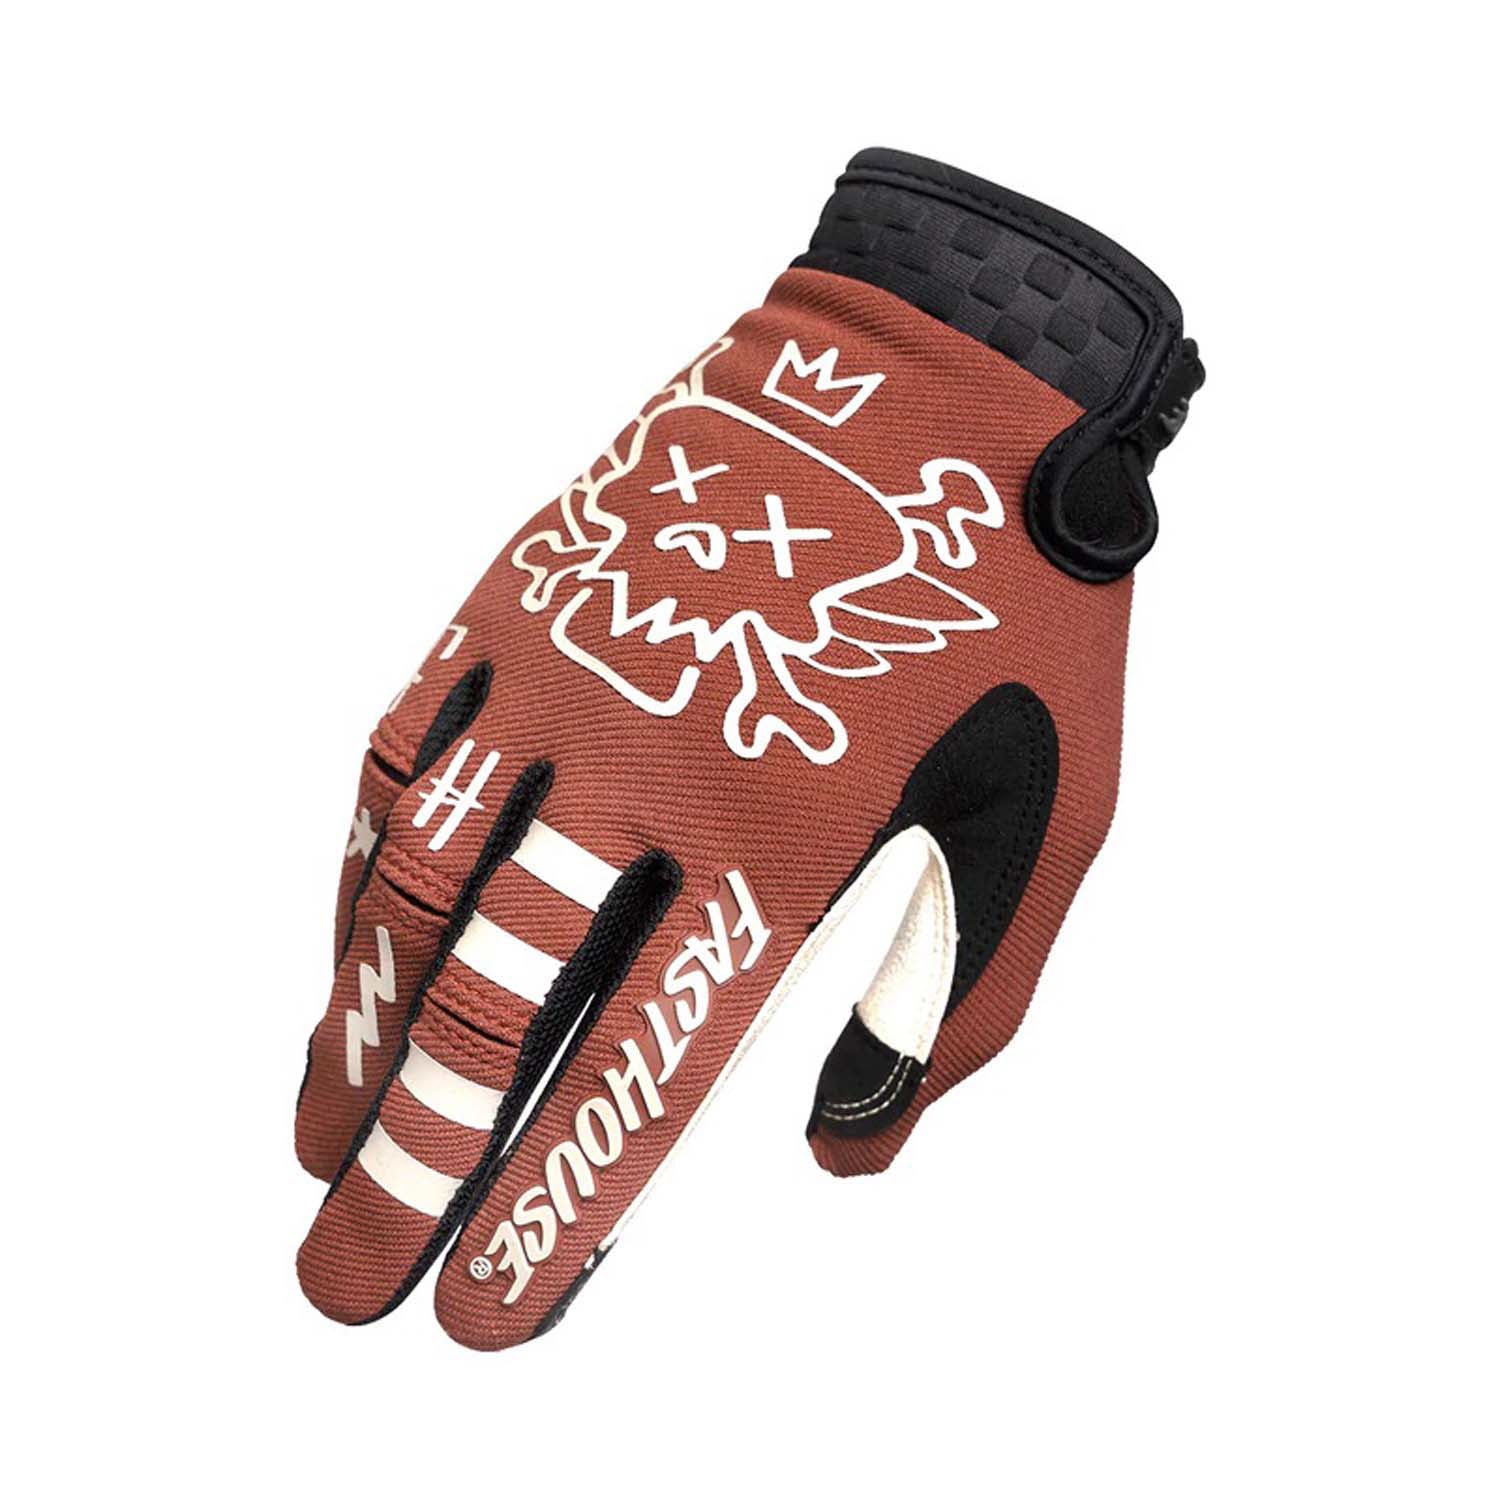 Fasthouse Speed Style Glove - Sale Stomp - Clay Bike Gloves